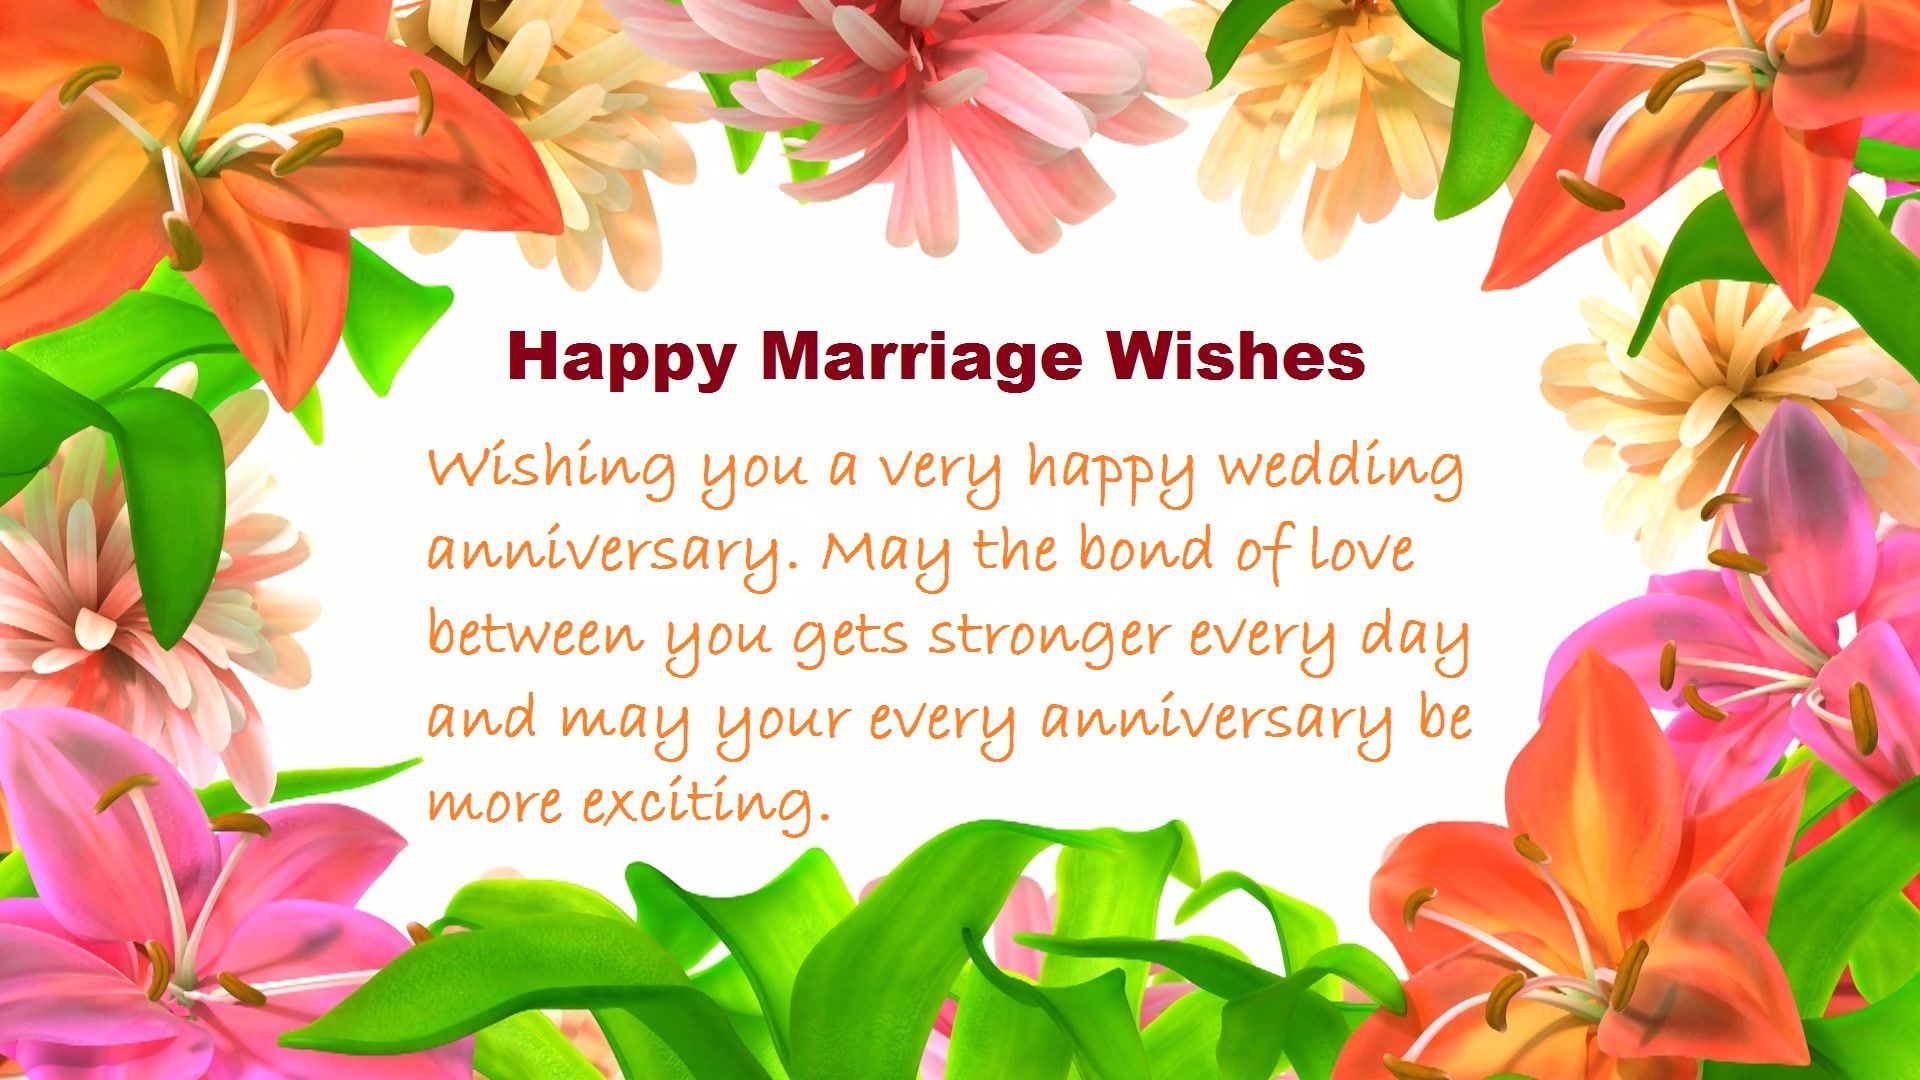 Happy Marriage Anniversary Wishes&Quotes Wallpaper Car Wallpaper